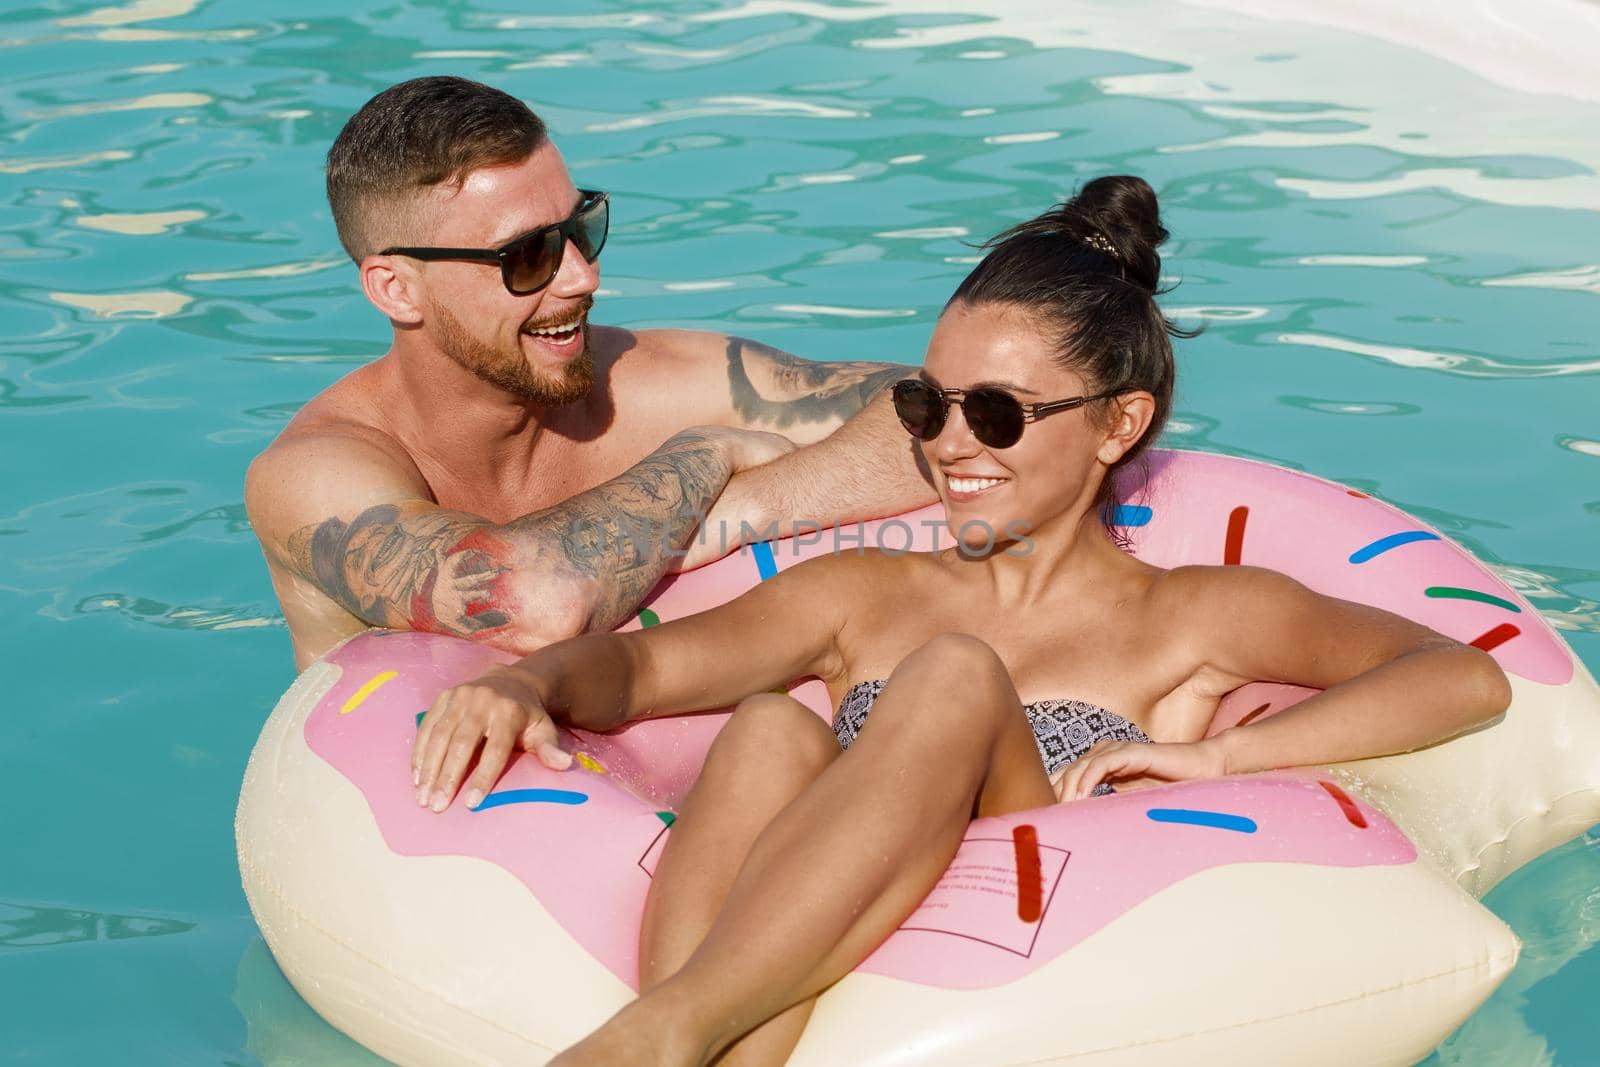 Happy couple talking while swimming on inflatable donut at the pool. Beautiful woman sitting on pool float, chatting with her boyfriend, relaxing together during summer vacation. Love, travel, lifestyle concept